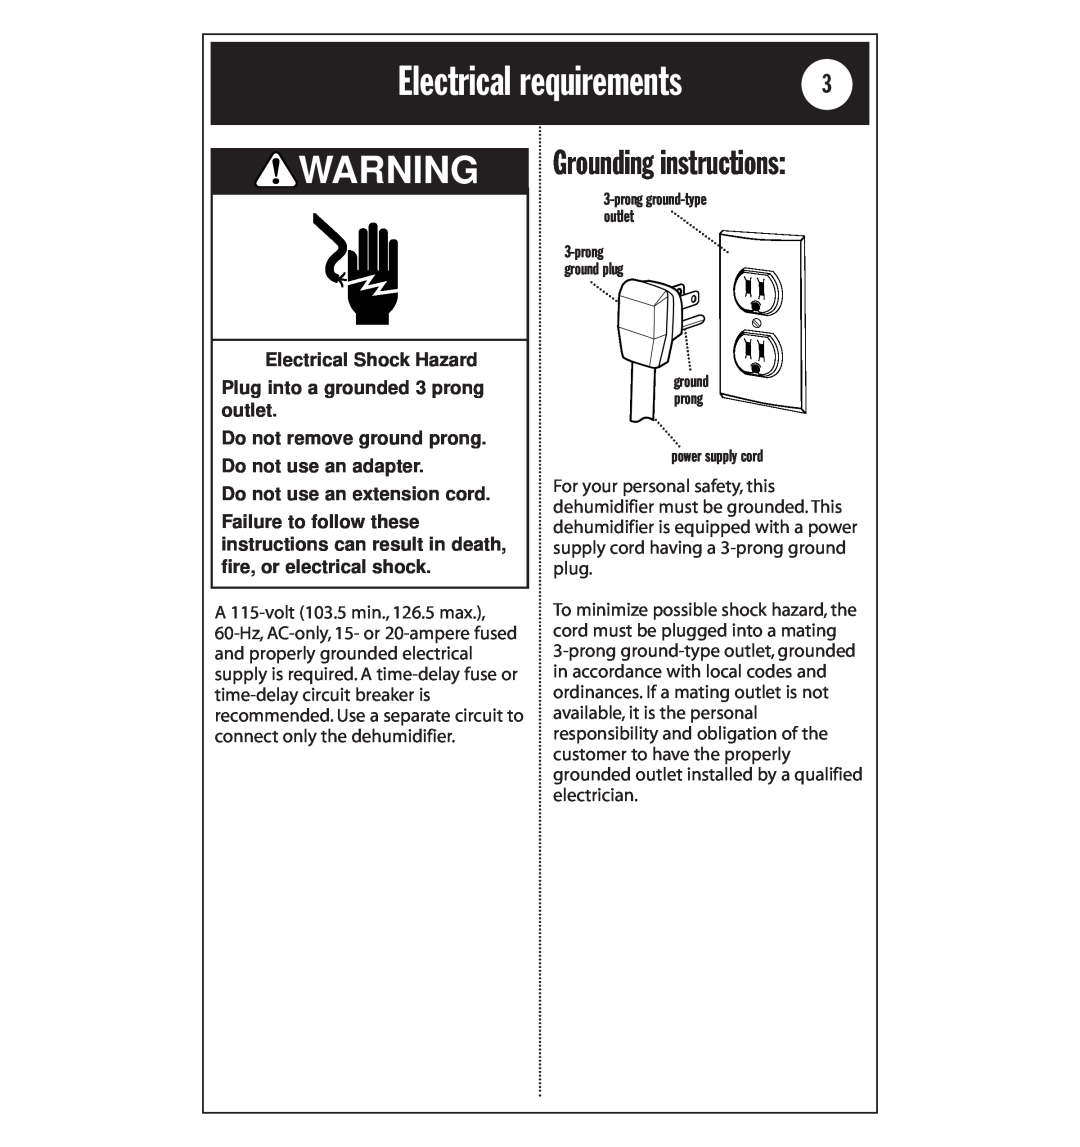 Whirlpool AD40LJ0 Electrical requirements, Grounding instructions, Electrical Shock Hazard, Do not use an extension cord 